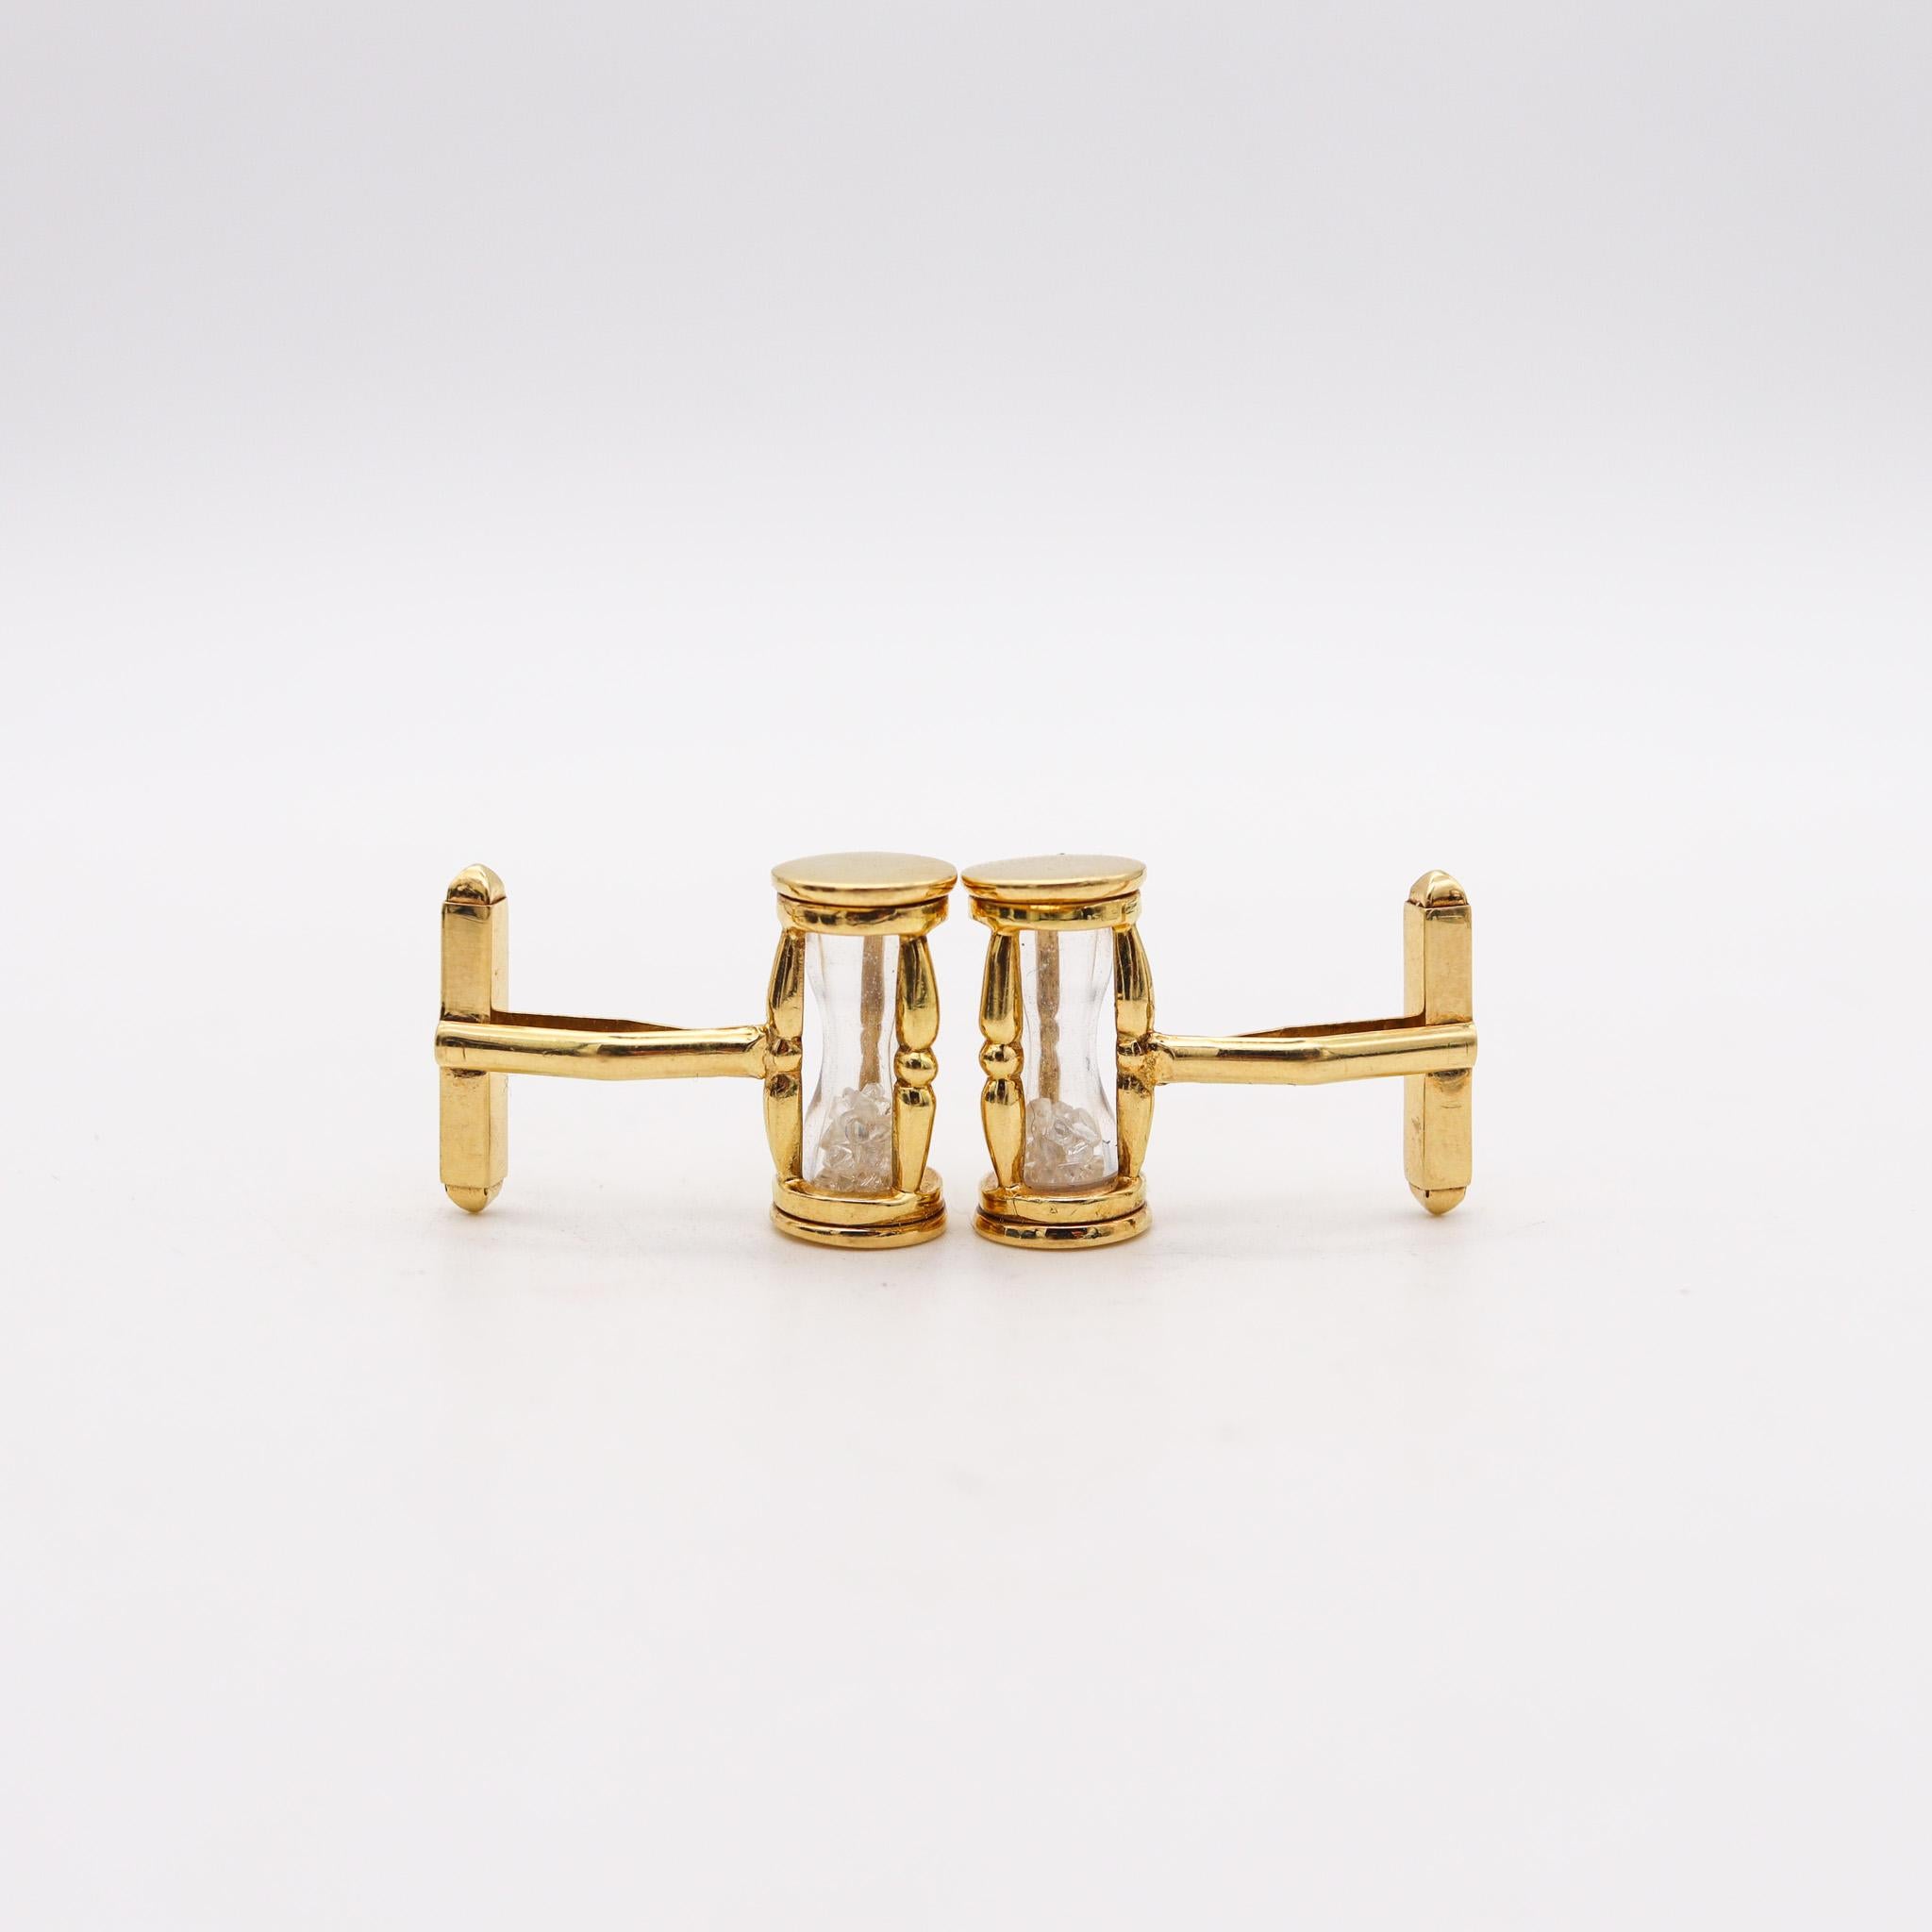 Modernist Germany Unusual Sand Clocks Cufflinks In 18Kt Yellow Gold With 1 Ctw Diamonds For Sale